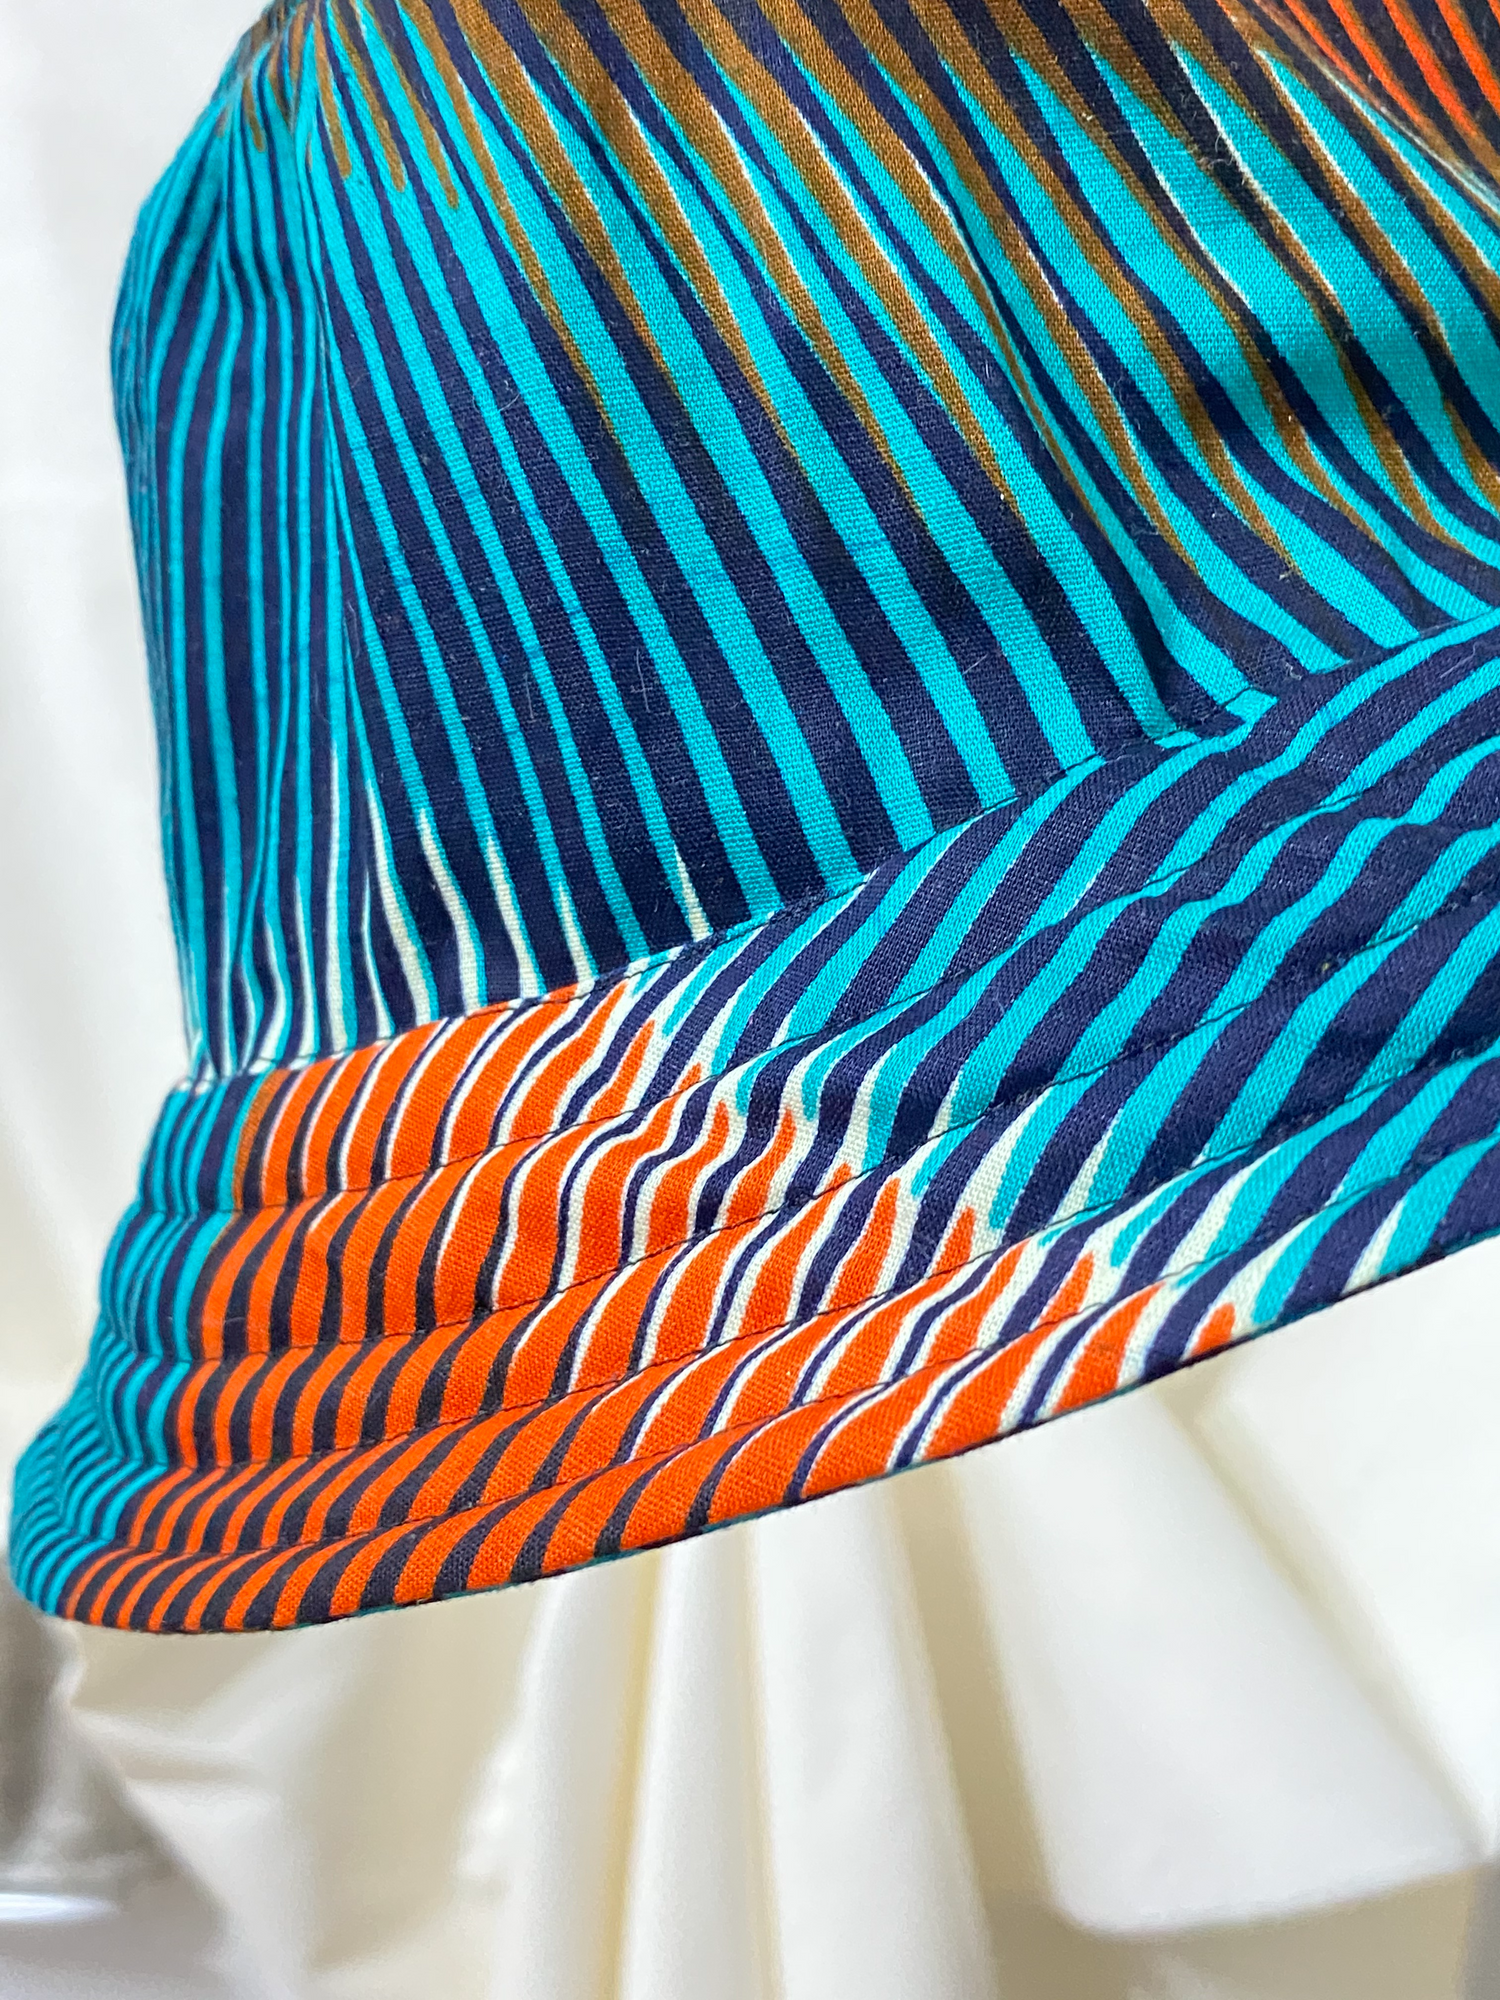 Close up of bucket hat named Bonaberi. Fabric is a turqouise tint with wave like lines in a darker turqouise and hues of orange.